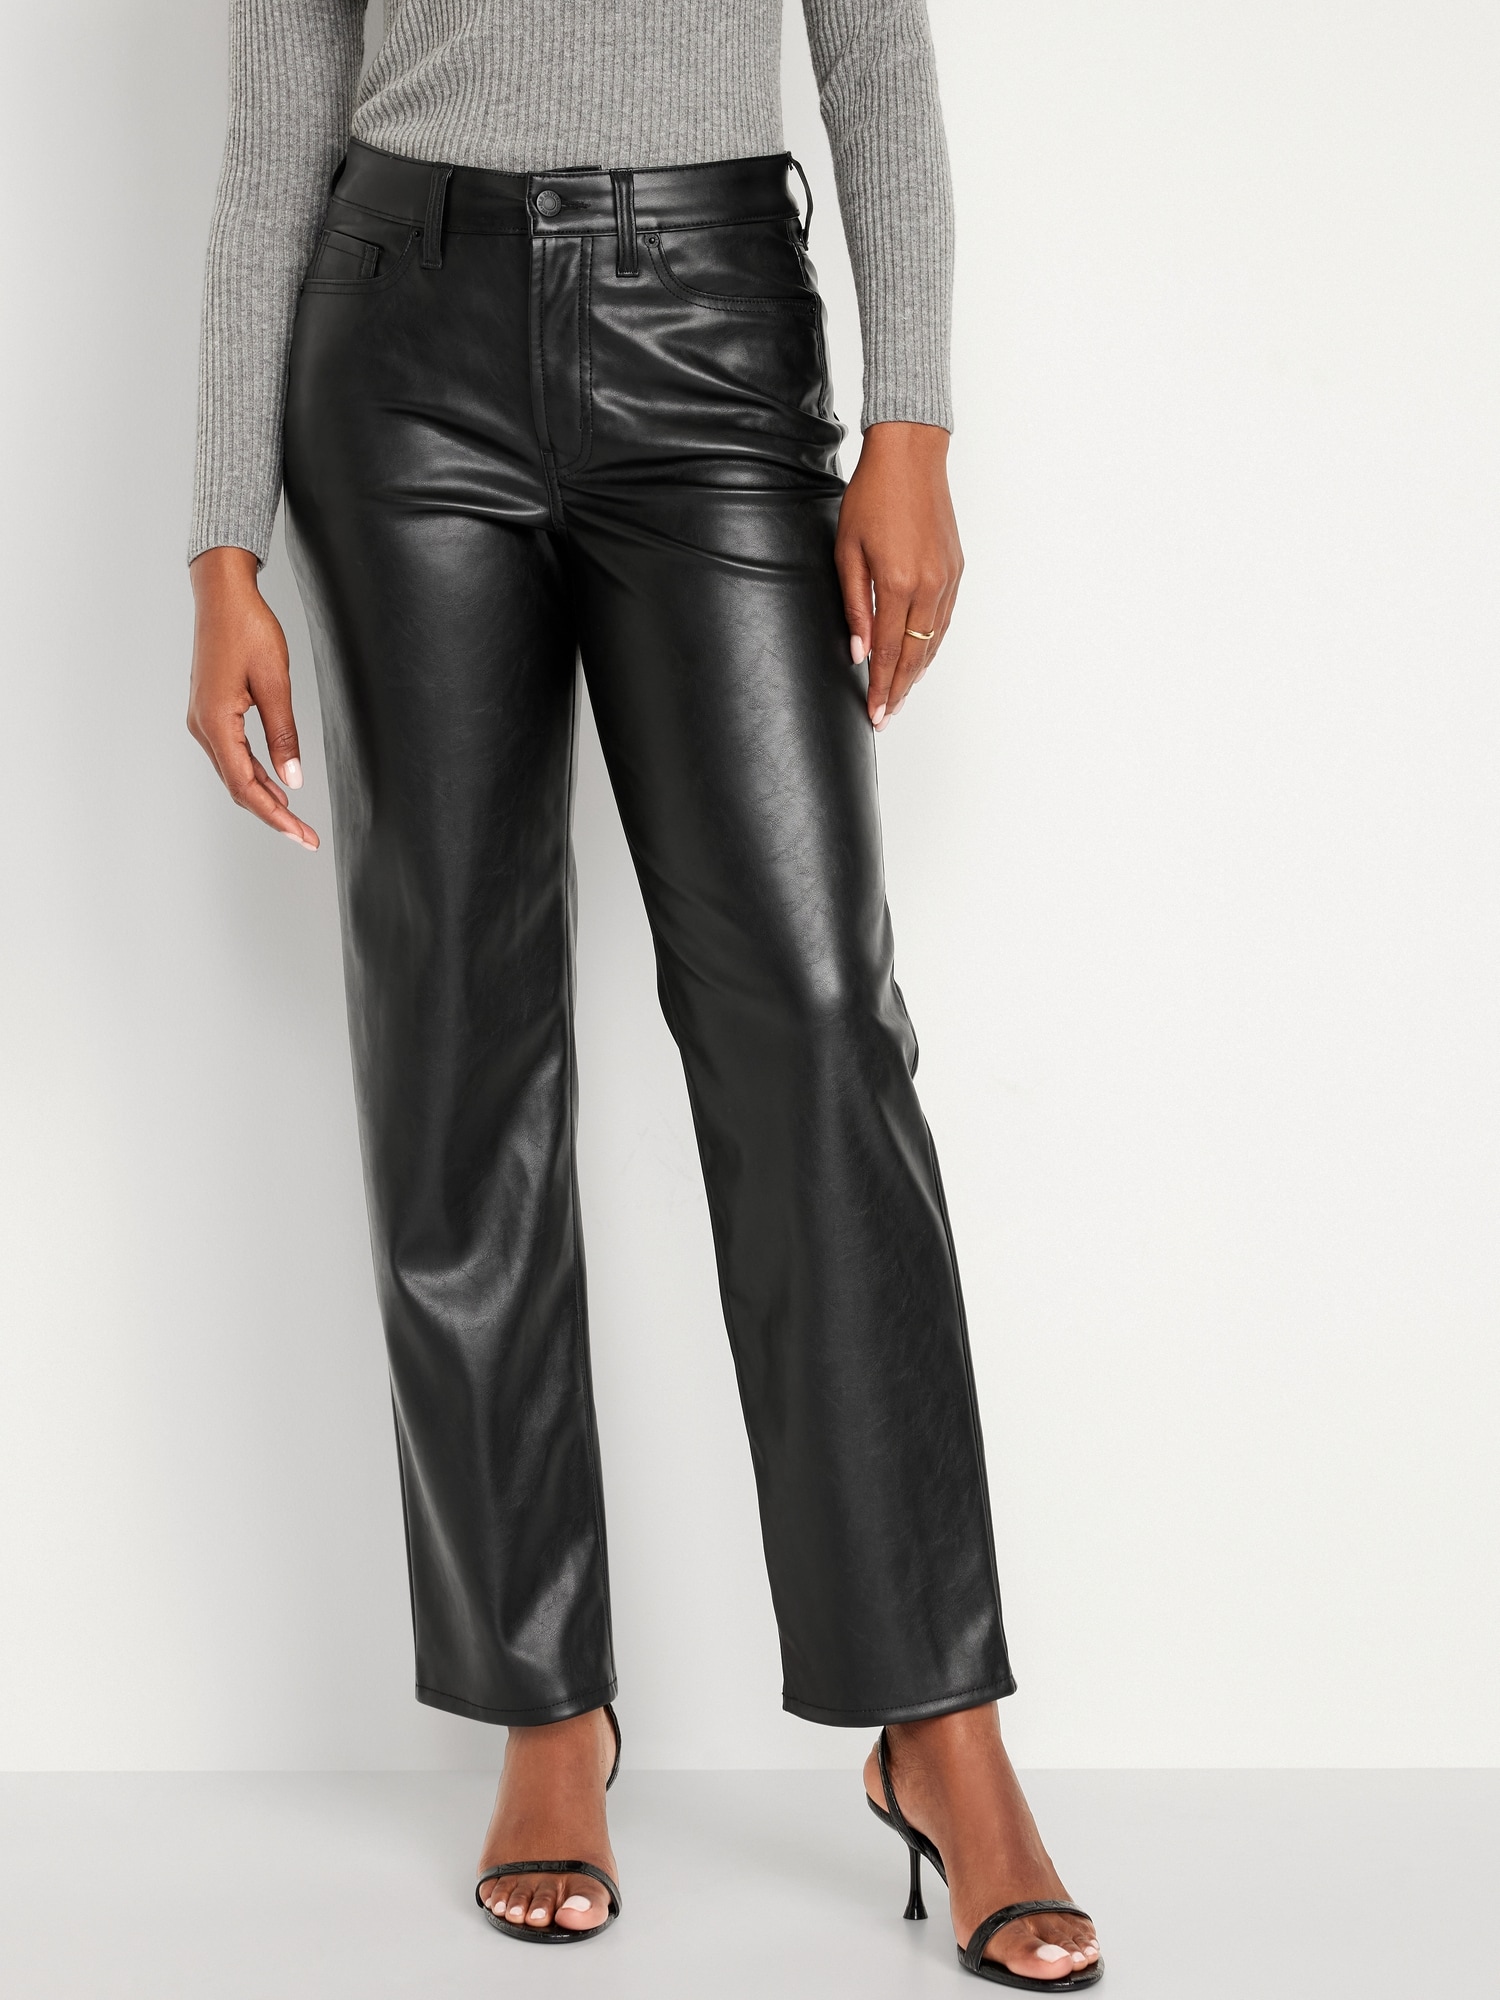 Buy Black High Waisted Button Jeans Leather Look Trousers Online-sonthuy.vn